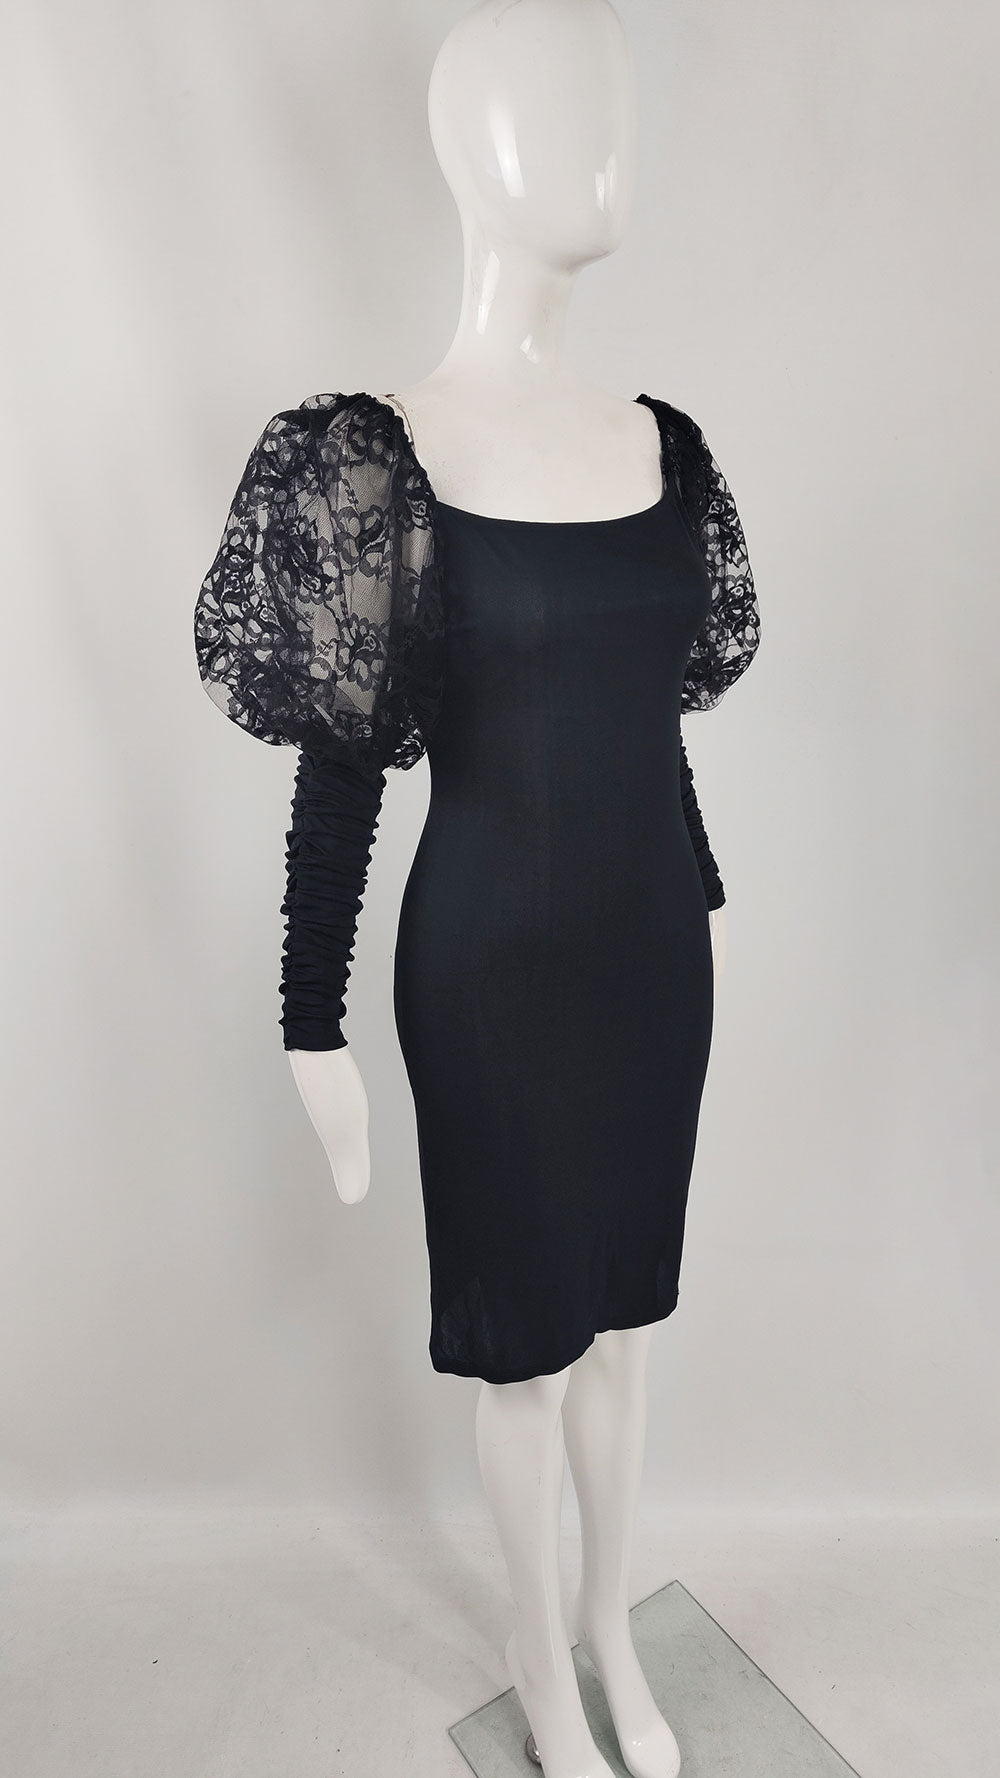 A fabulous vintage party dress from the 1980s by Roots of London with black lace leg o mutton sleeves.